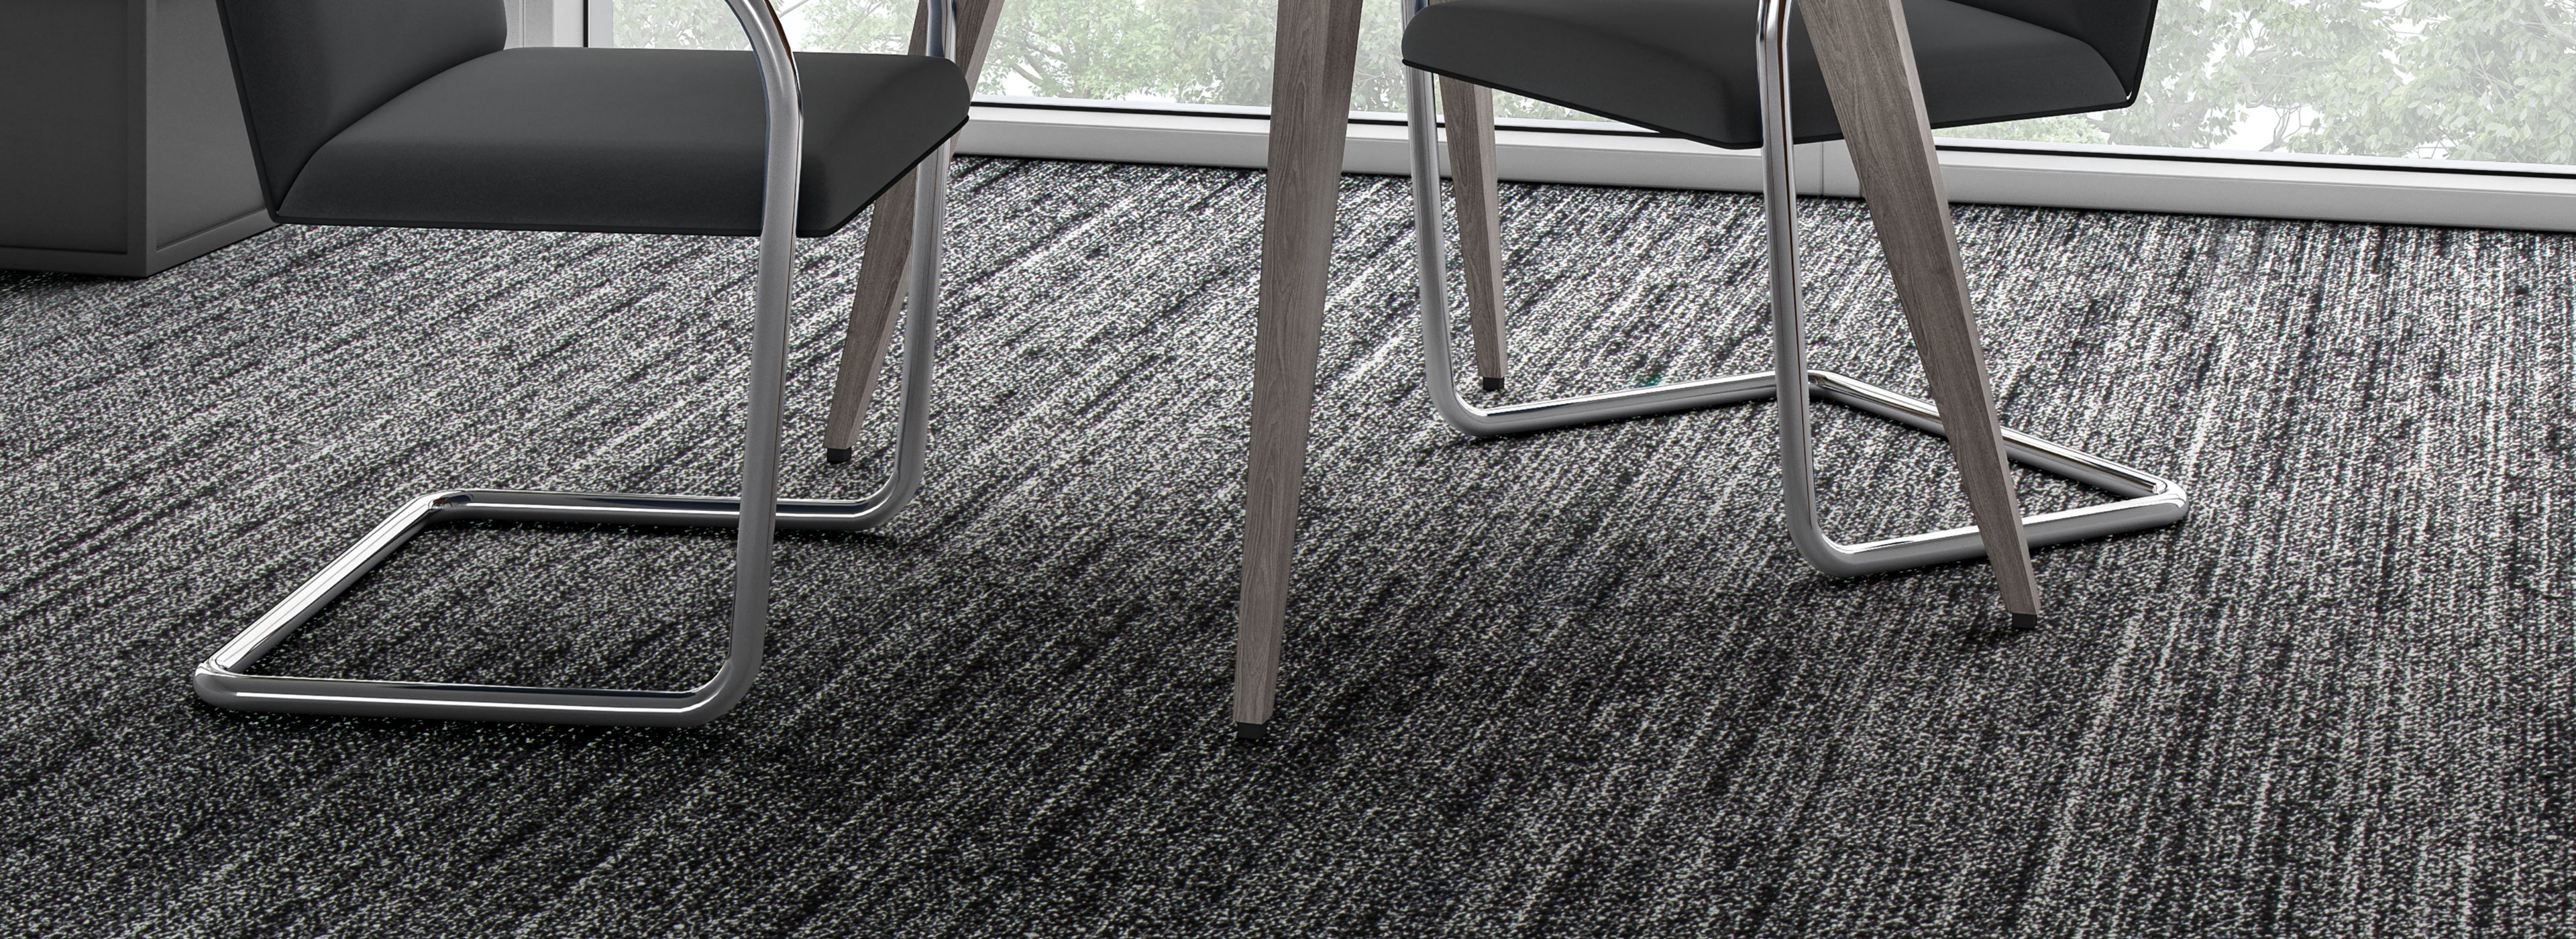 Interface WW870 plank carpet tile shown with small table and chairs imagen número 1